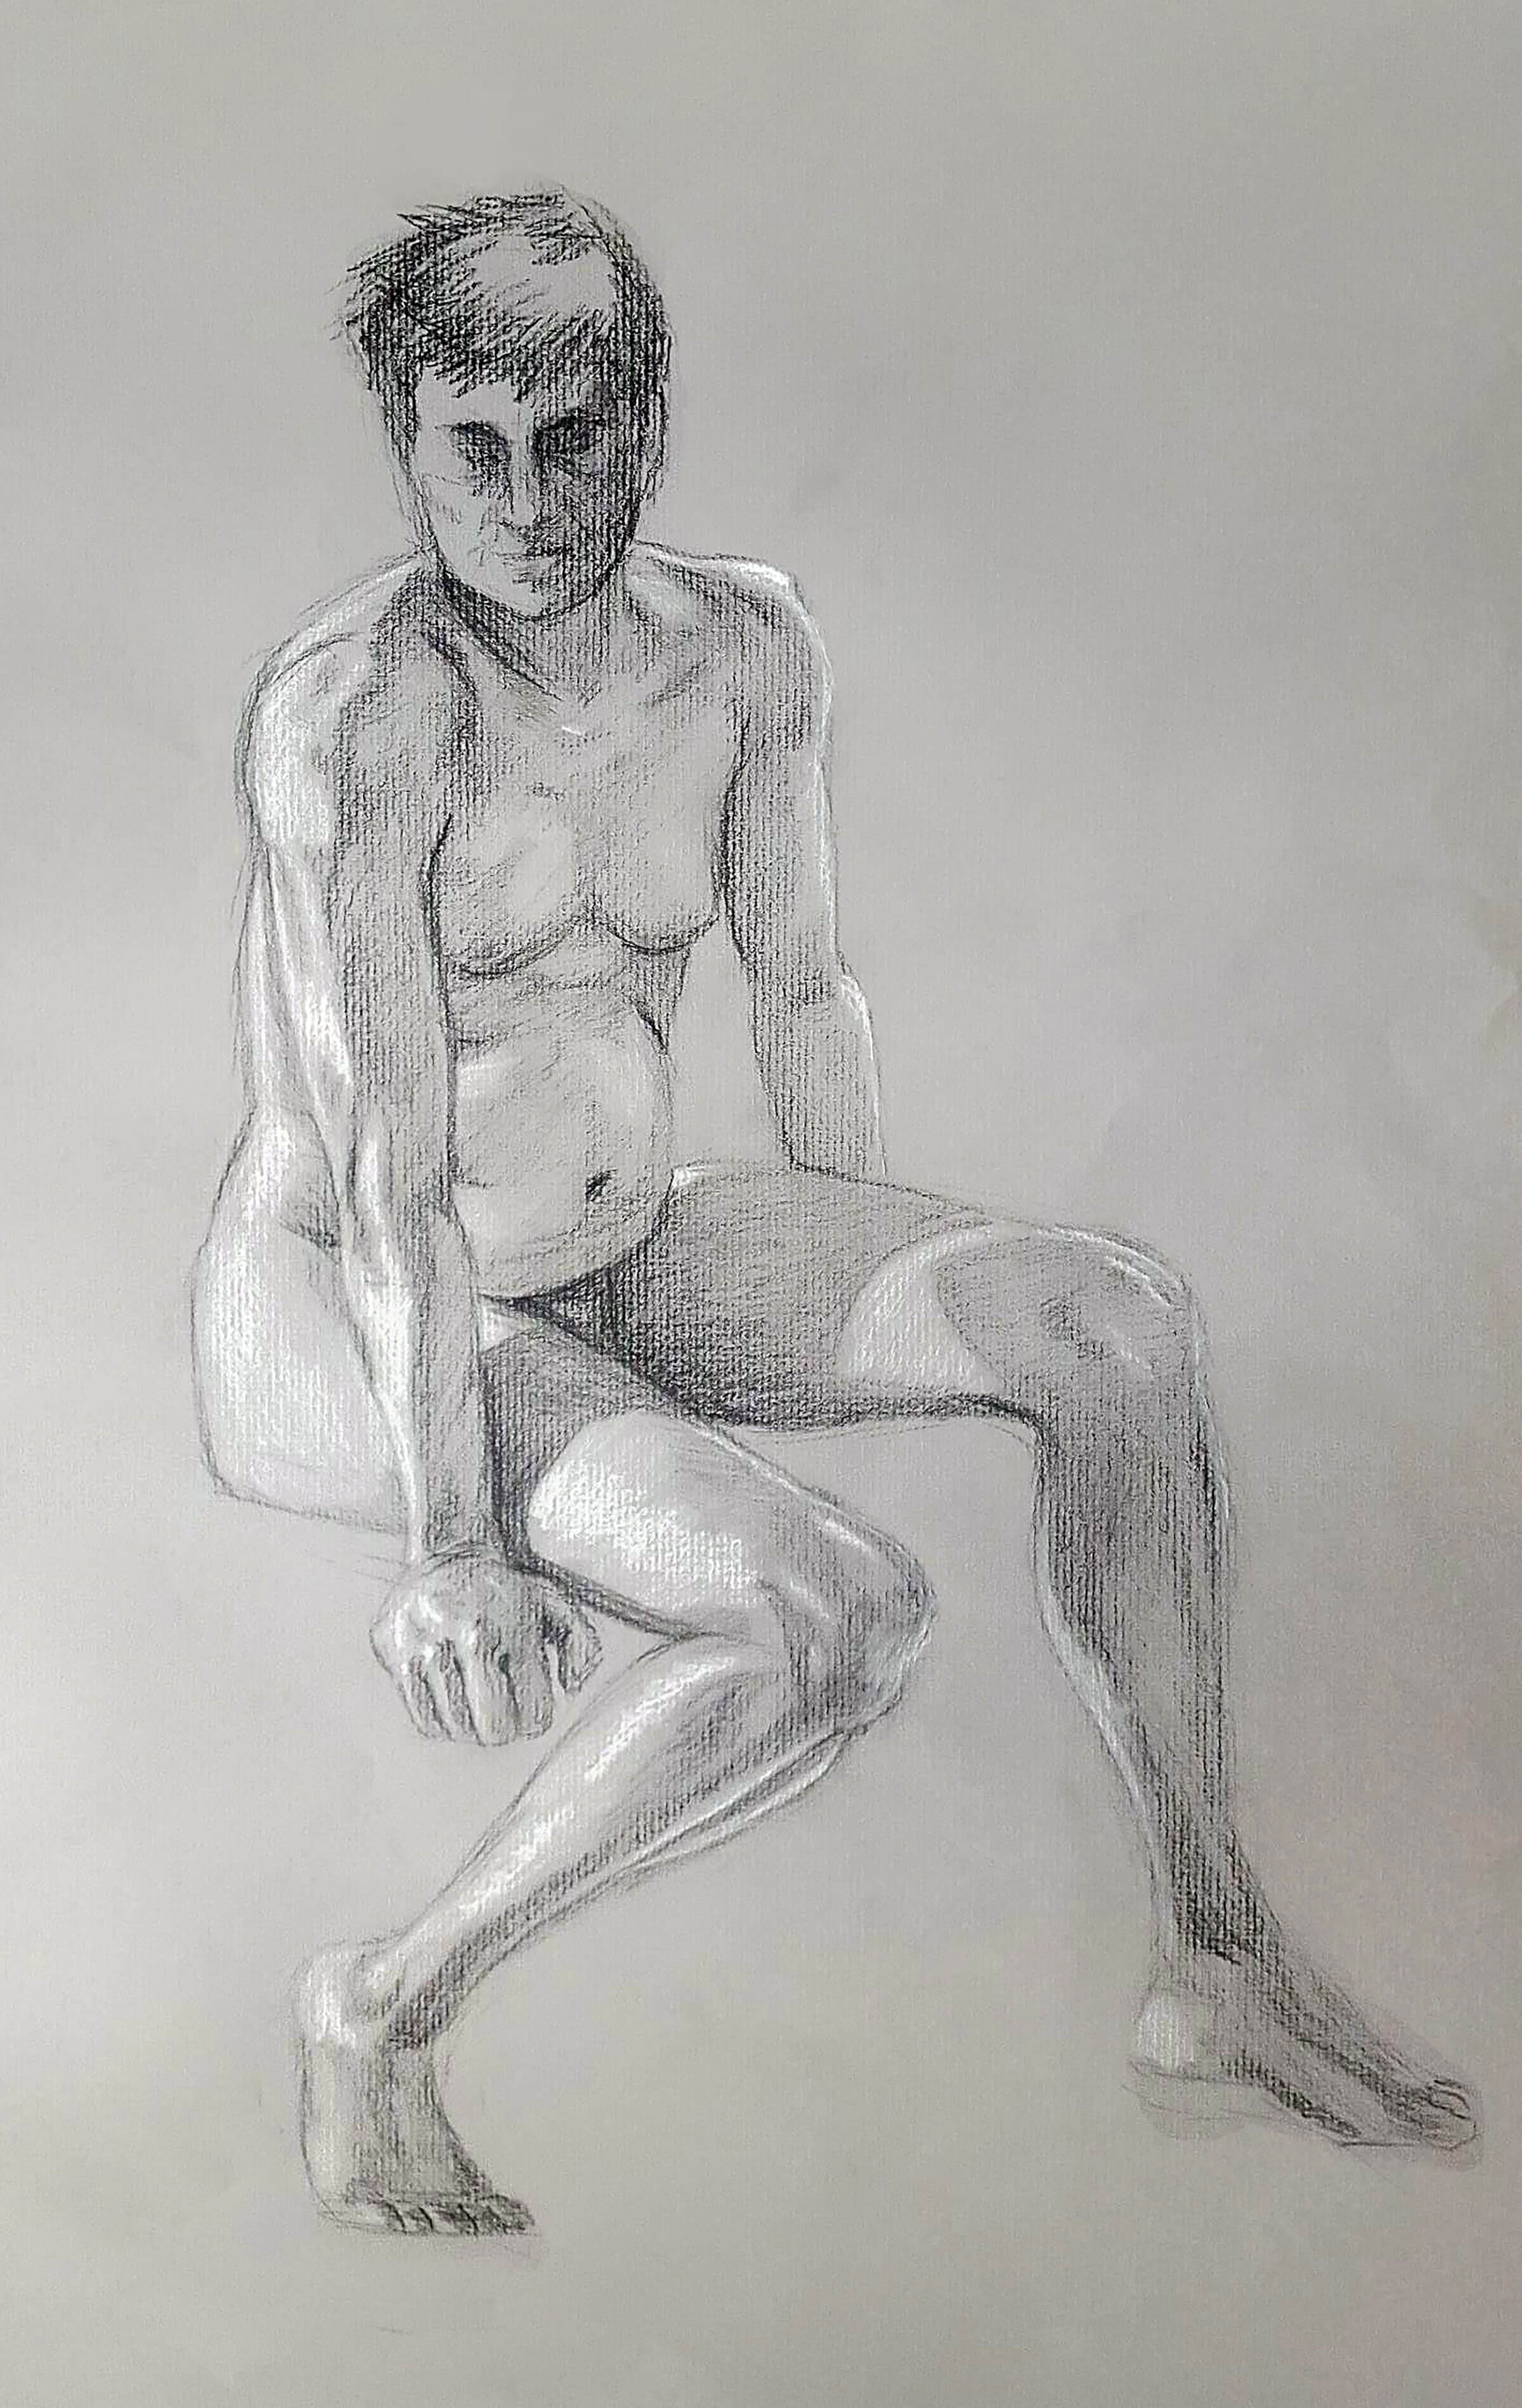 A black-and-white sketch of a naked man posed in a seated position glancing downward.